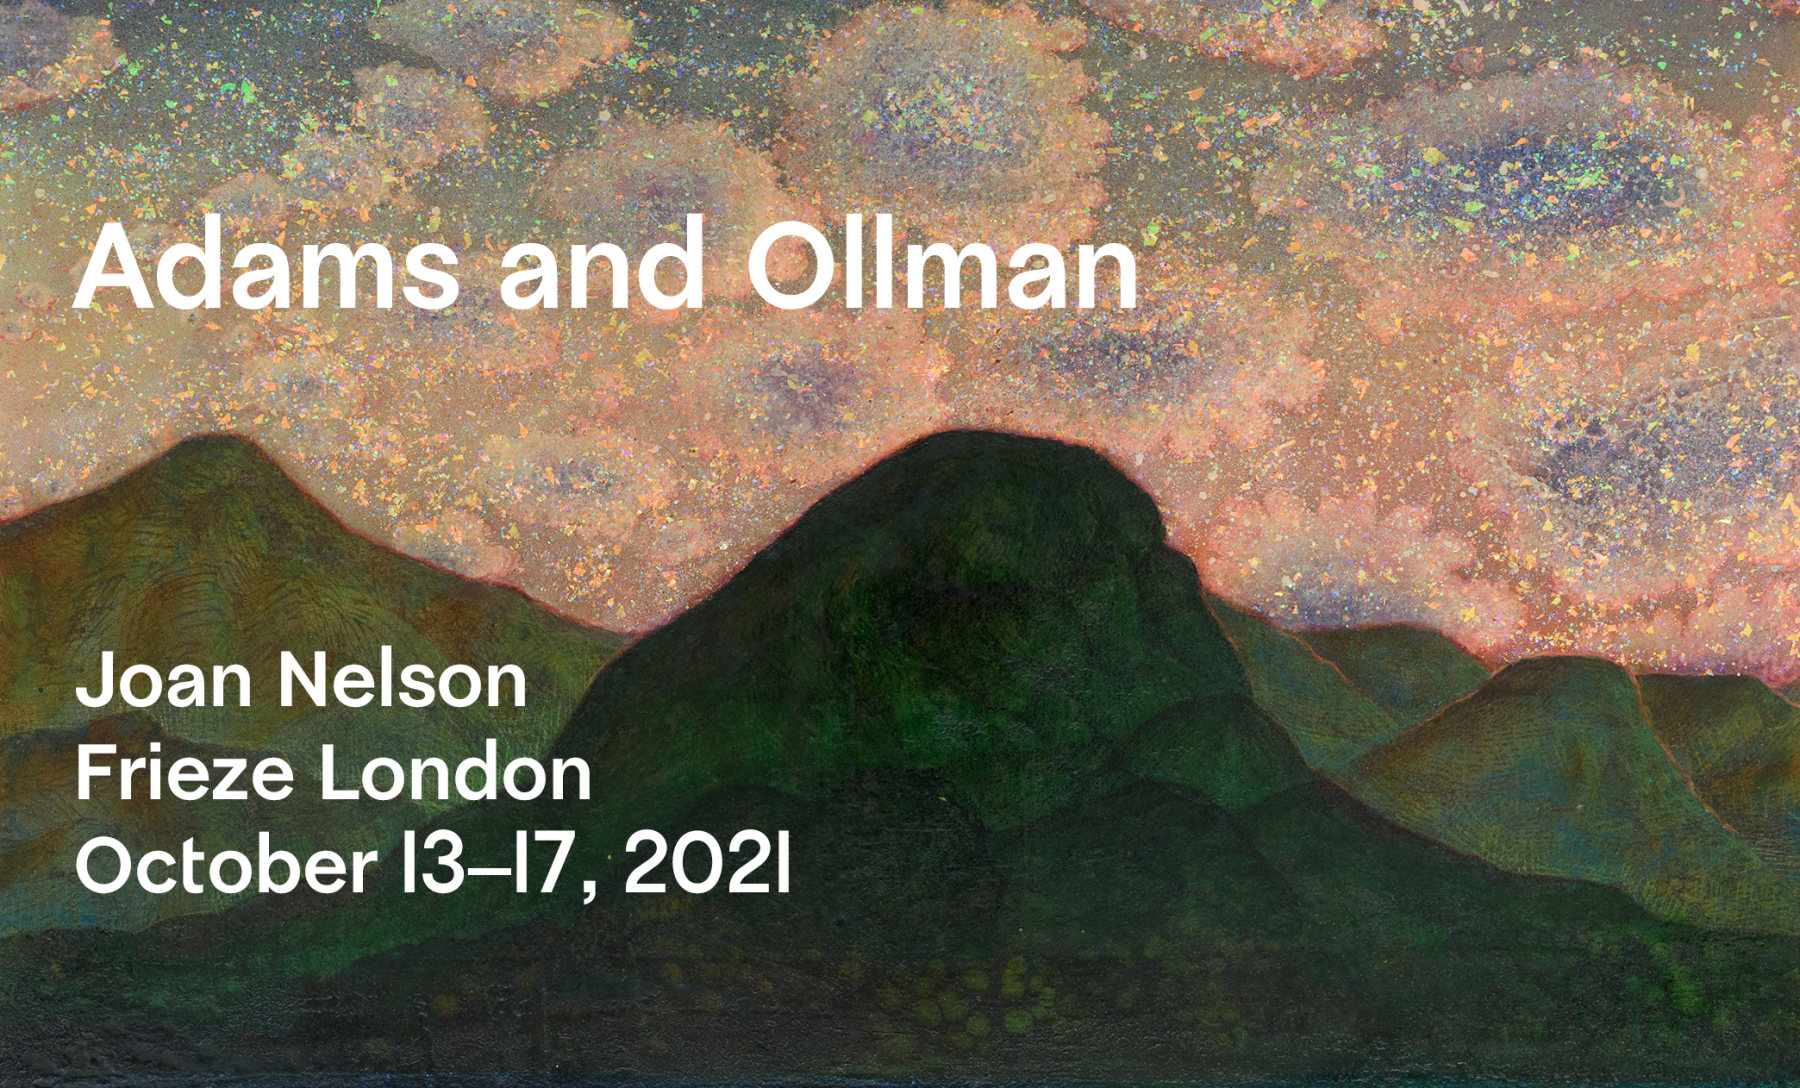 Joan Nelson at Frieze London - October 13–17, 2021 - Viewing Room - Adams and Ollman Viewing Room